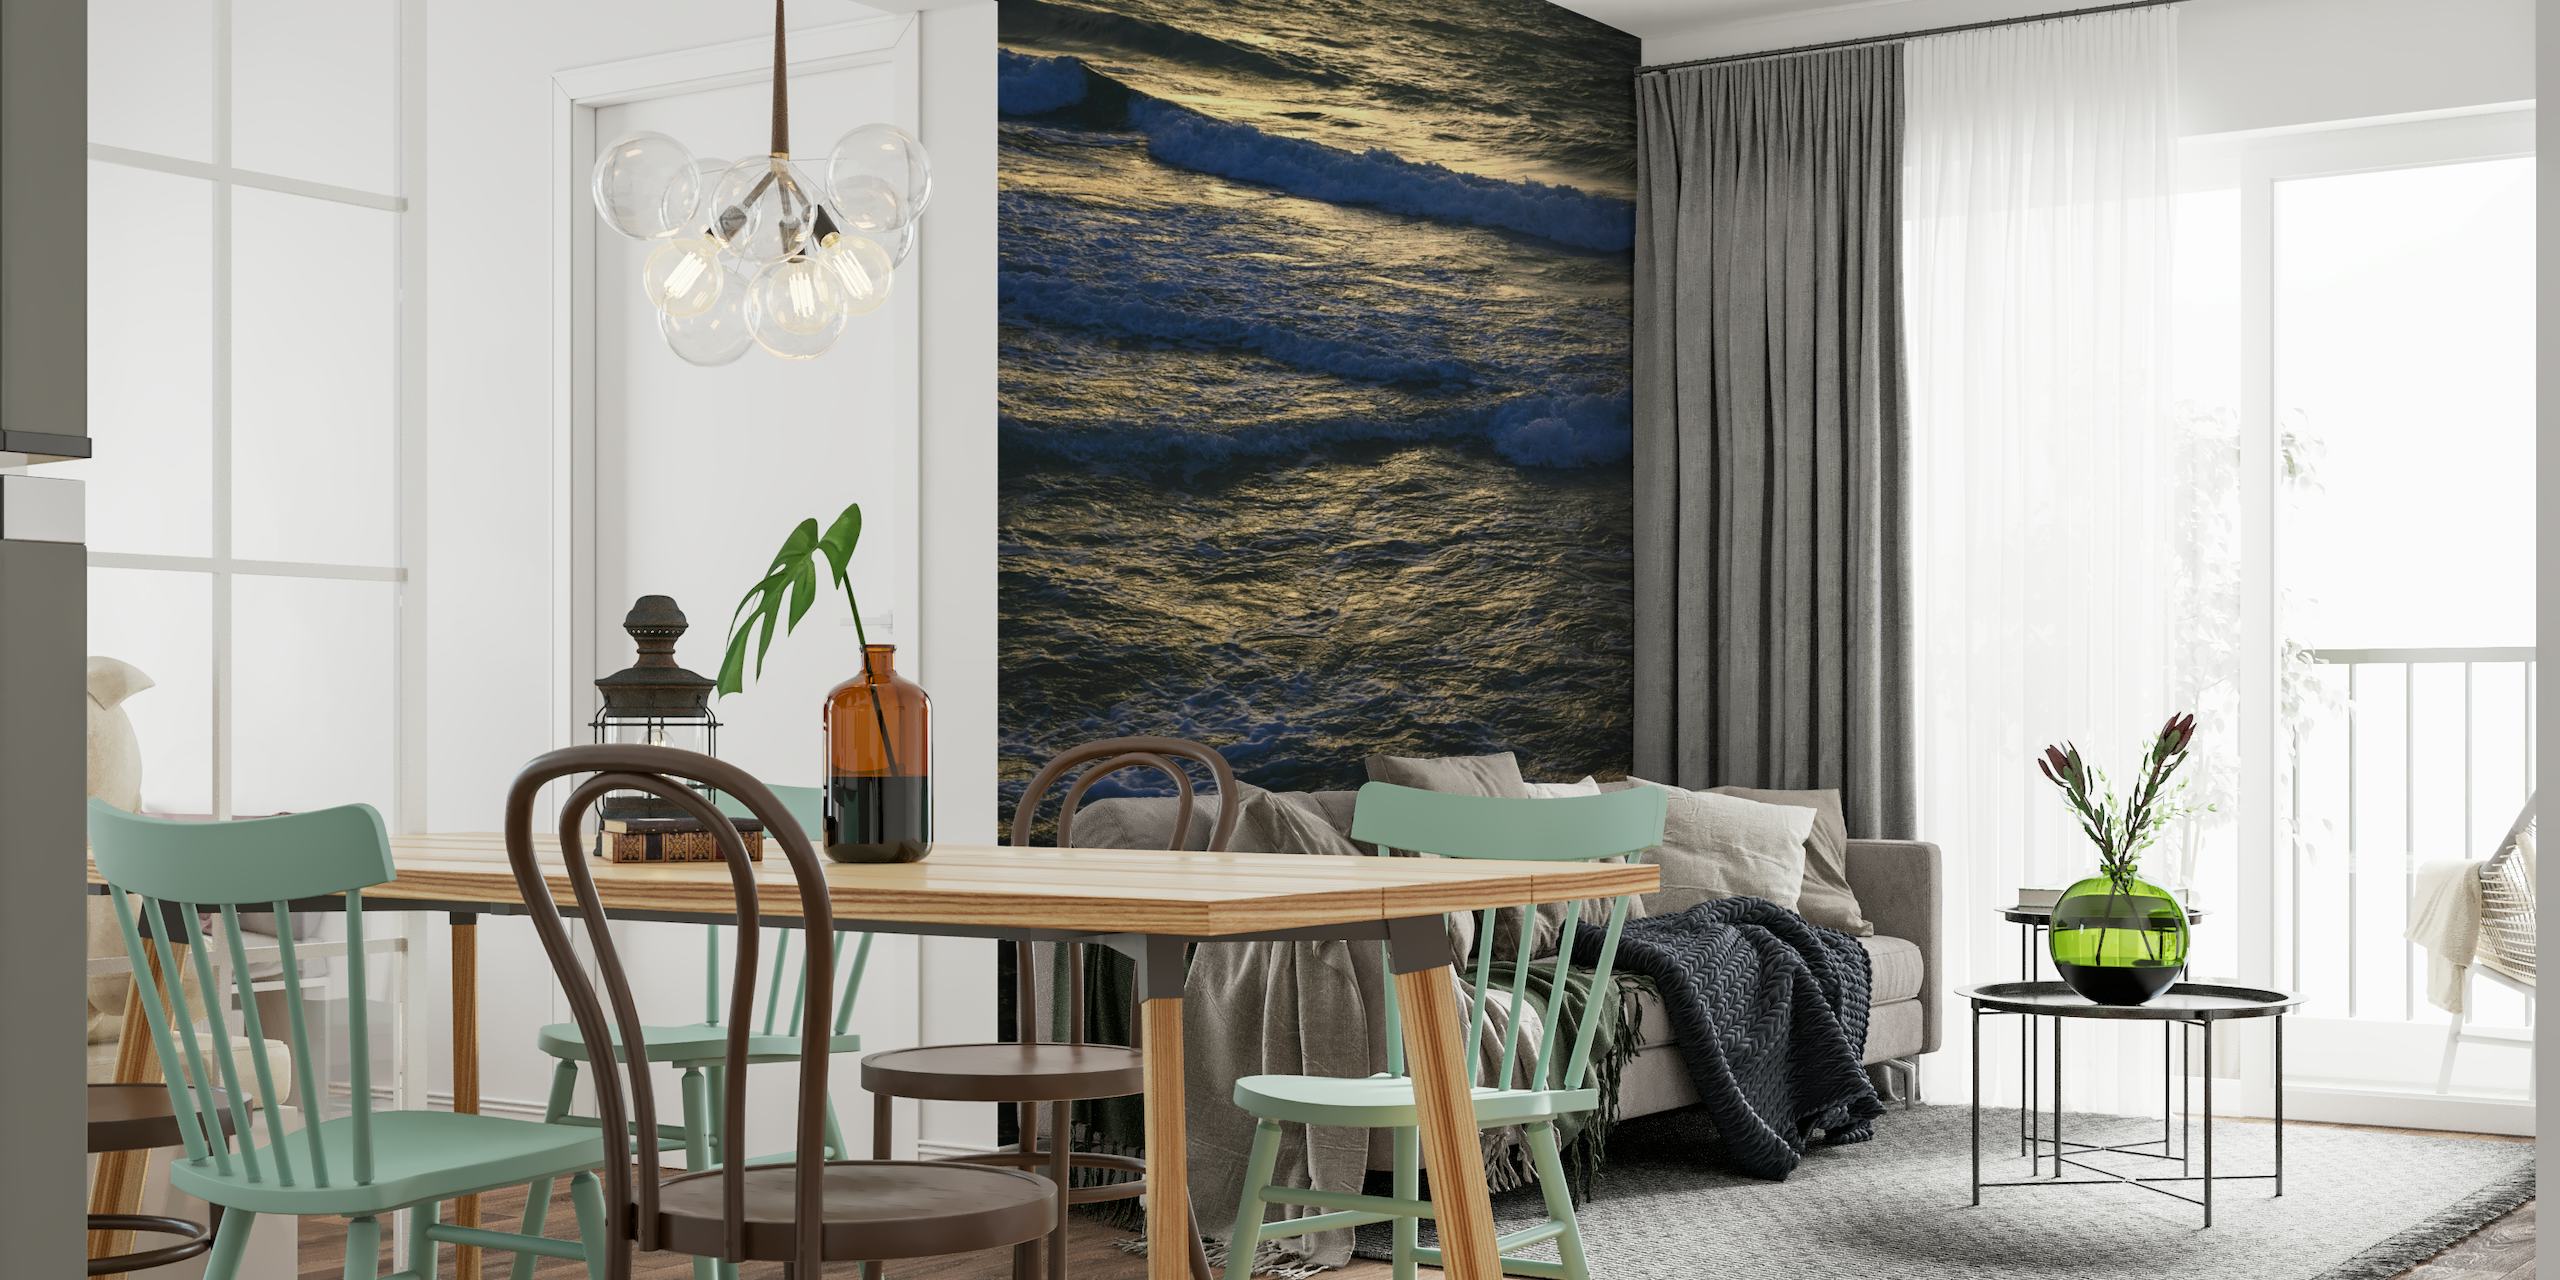 Ocean waves wall mural showing the calm seascape at dusk, 'Seaside 39' for home decor